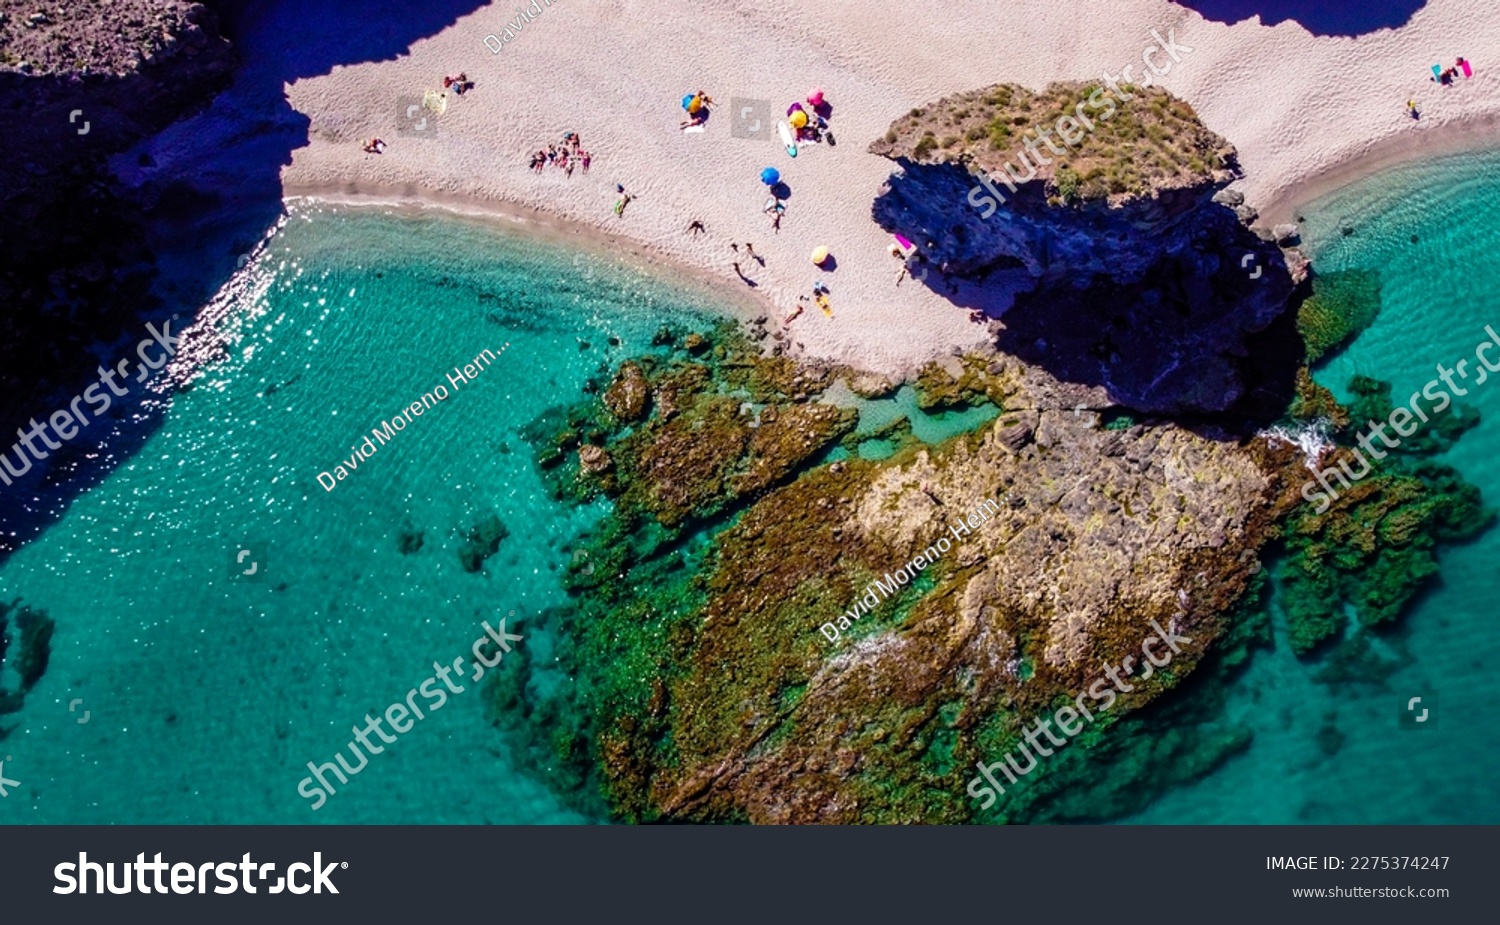 Seashore, coastline, scenic view of people at unspoiled beach in Almeria, called Playa de los Muertos, in English The beach of Deads due to the strong currents that cause many deaths year after year #2275374247